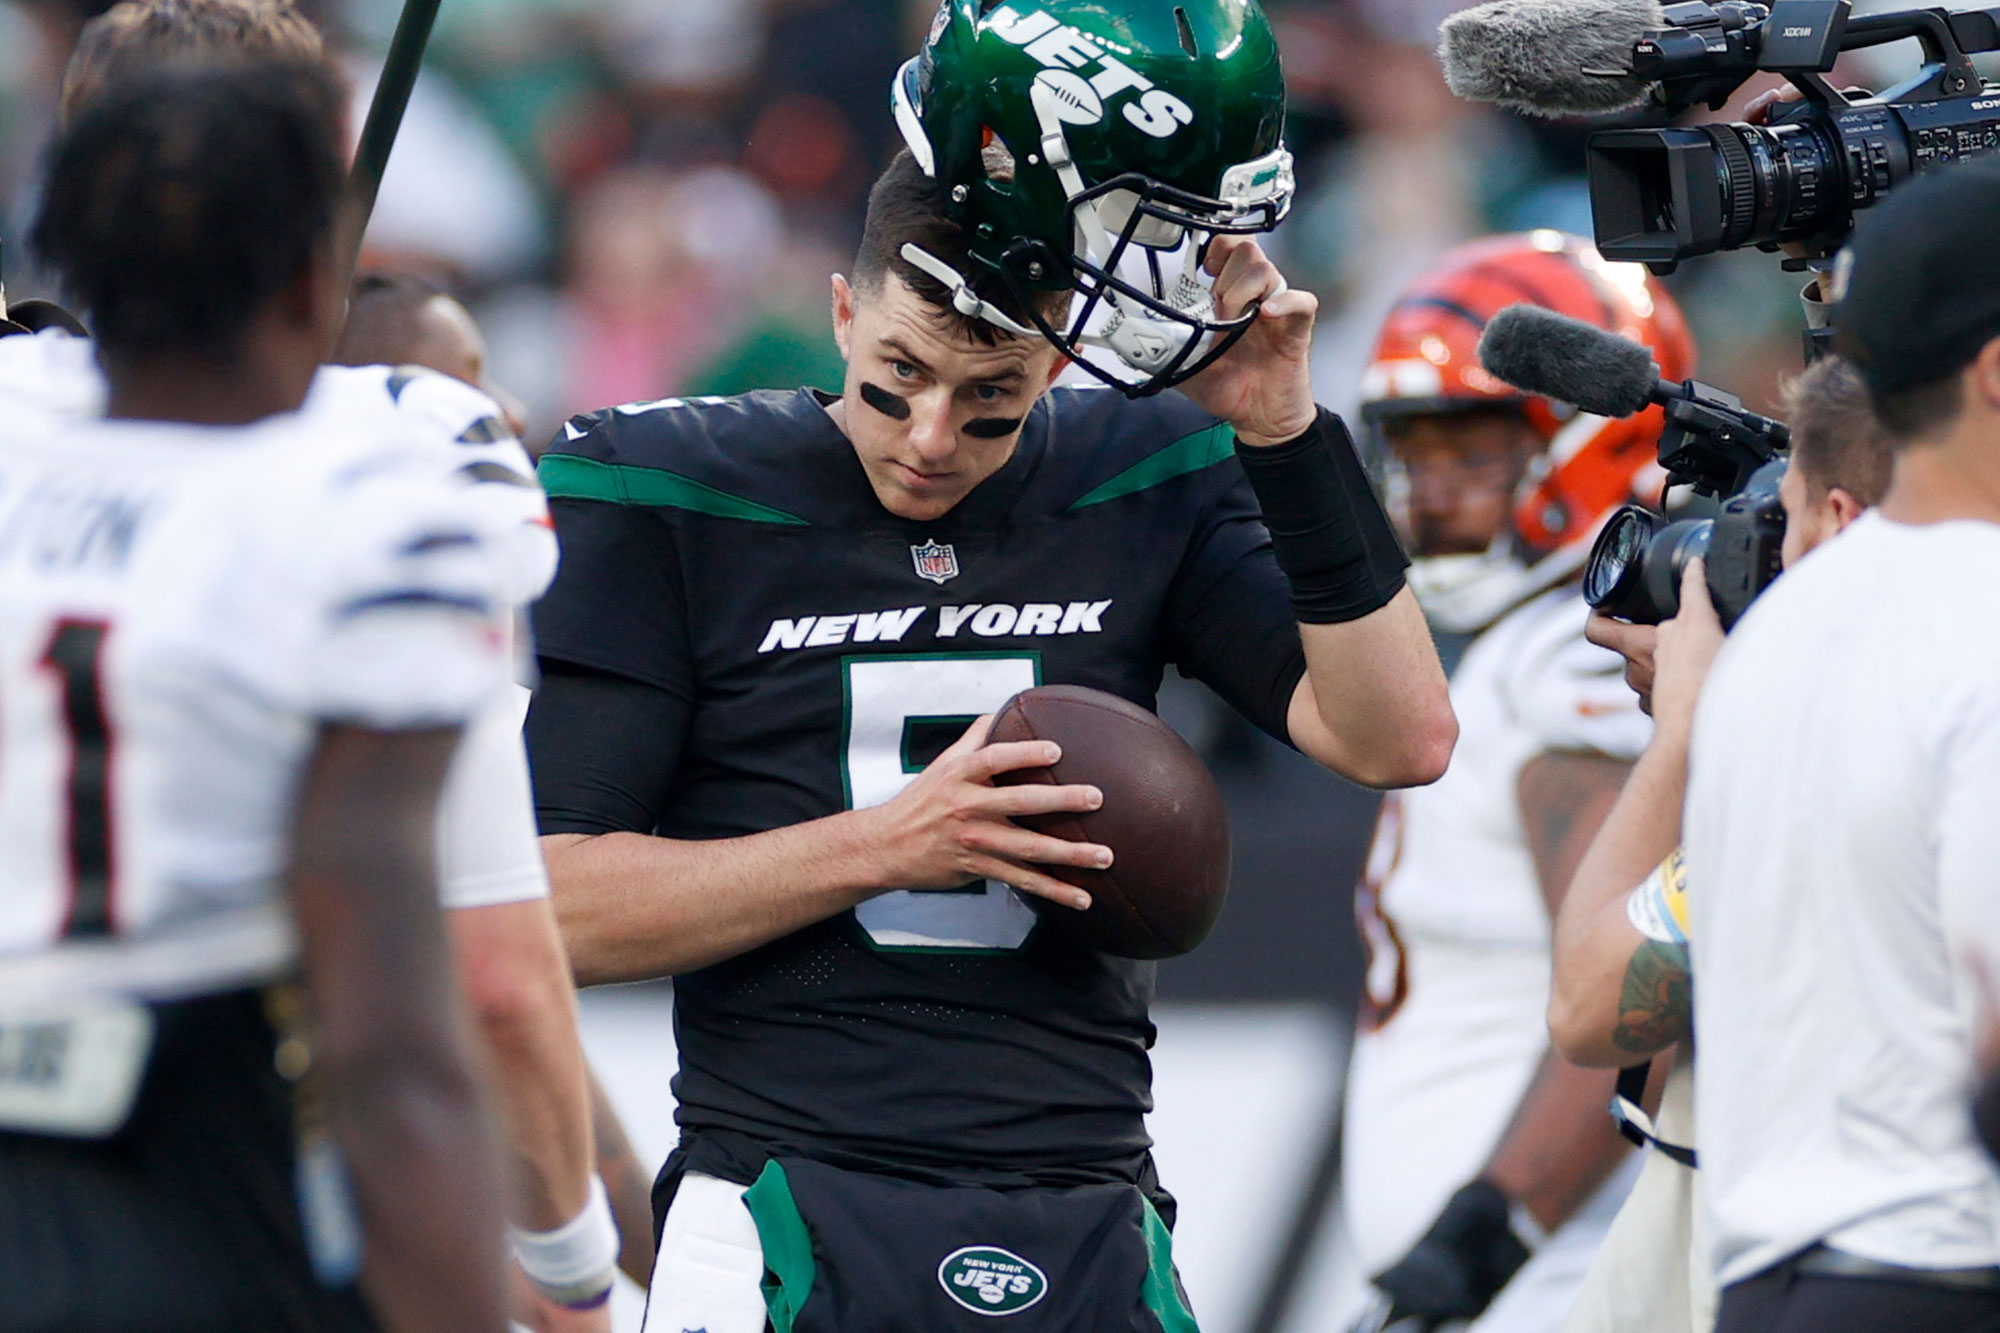 Mike White #5 of the New York Jets reacts after defeating the Cincinnati Bengals 34-31 in his first career start at MetLife Stadium on October 31, 2021 in East Rutherford, New Jersey. (Photo by Sarah Stier/Getty Images)